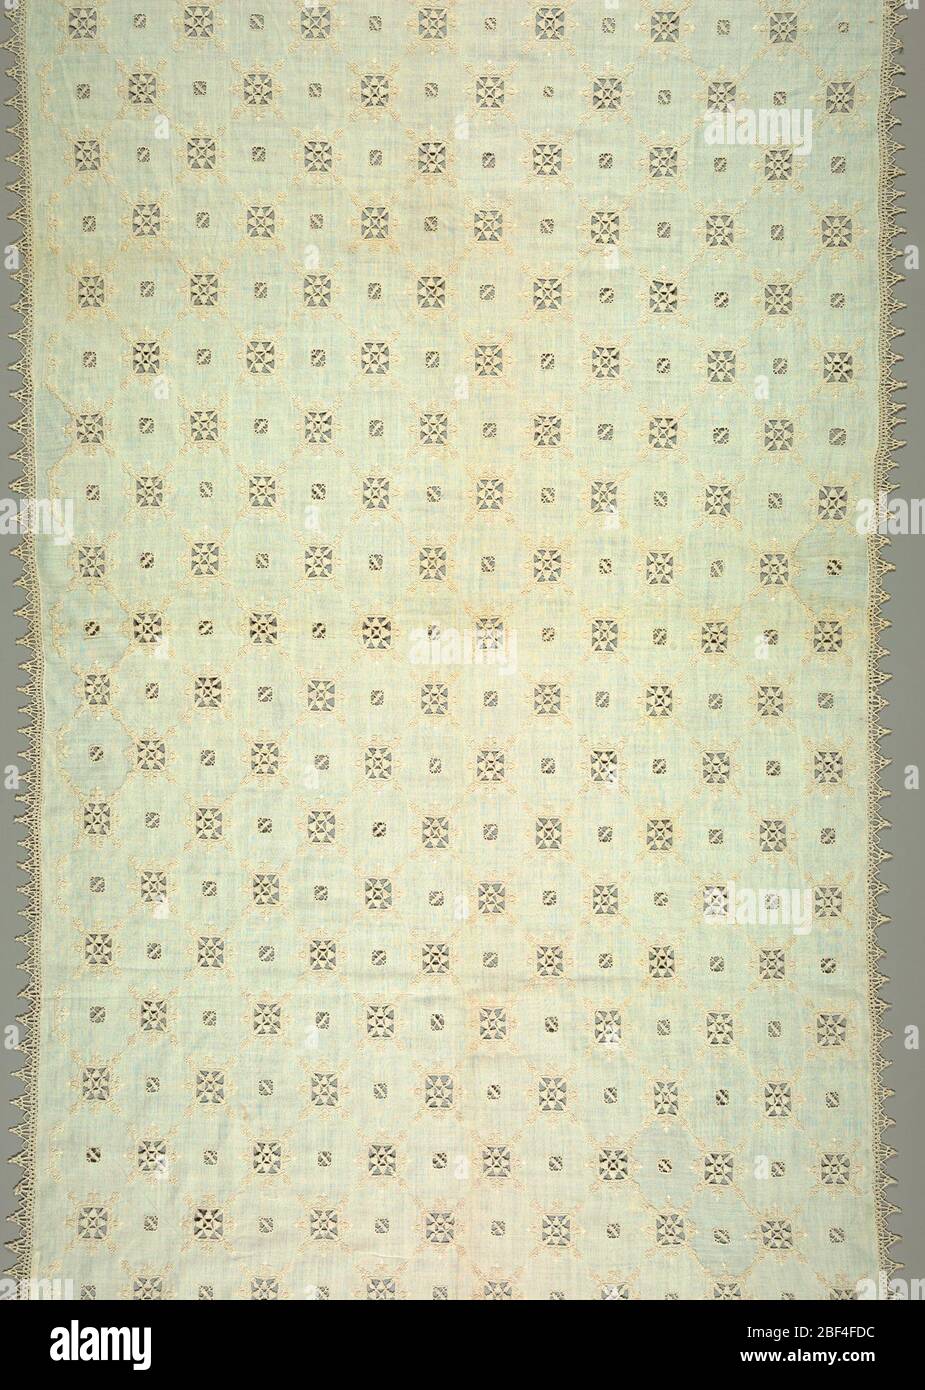 Cover. Cover with a detached arrangement of square designs of cutwork connected with white embroidered lines forming a trellis pattern. Squares framed in white embroidered design in spear-shaped patterns. Edging of pointed bobbin lace. Stock Photo